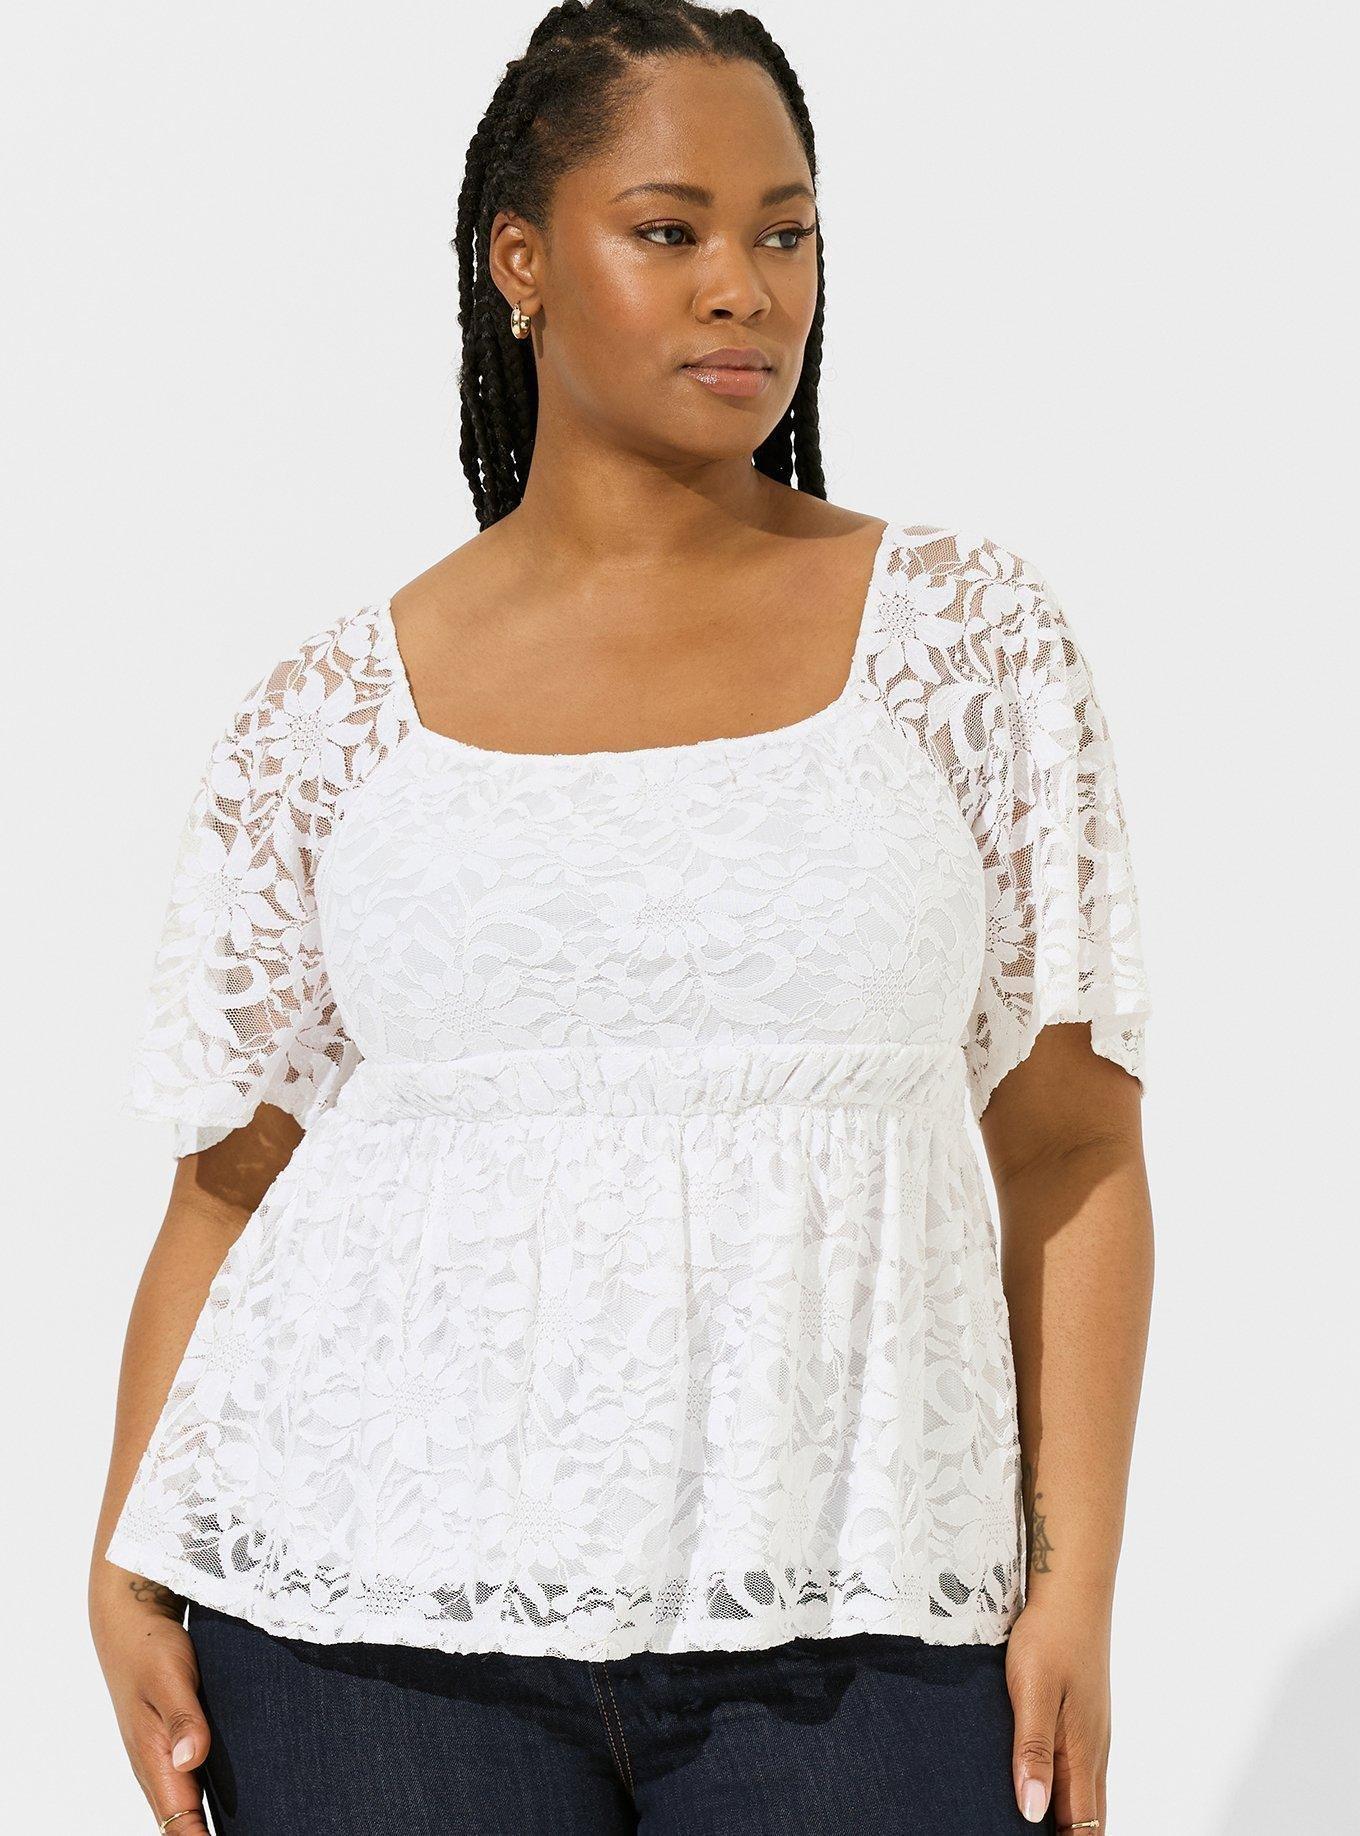 TORRID Lace Square Neck Long Sleeve Top